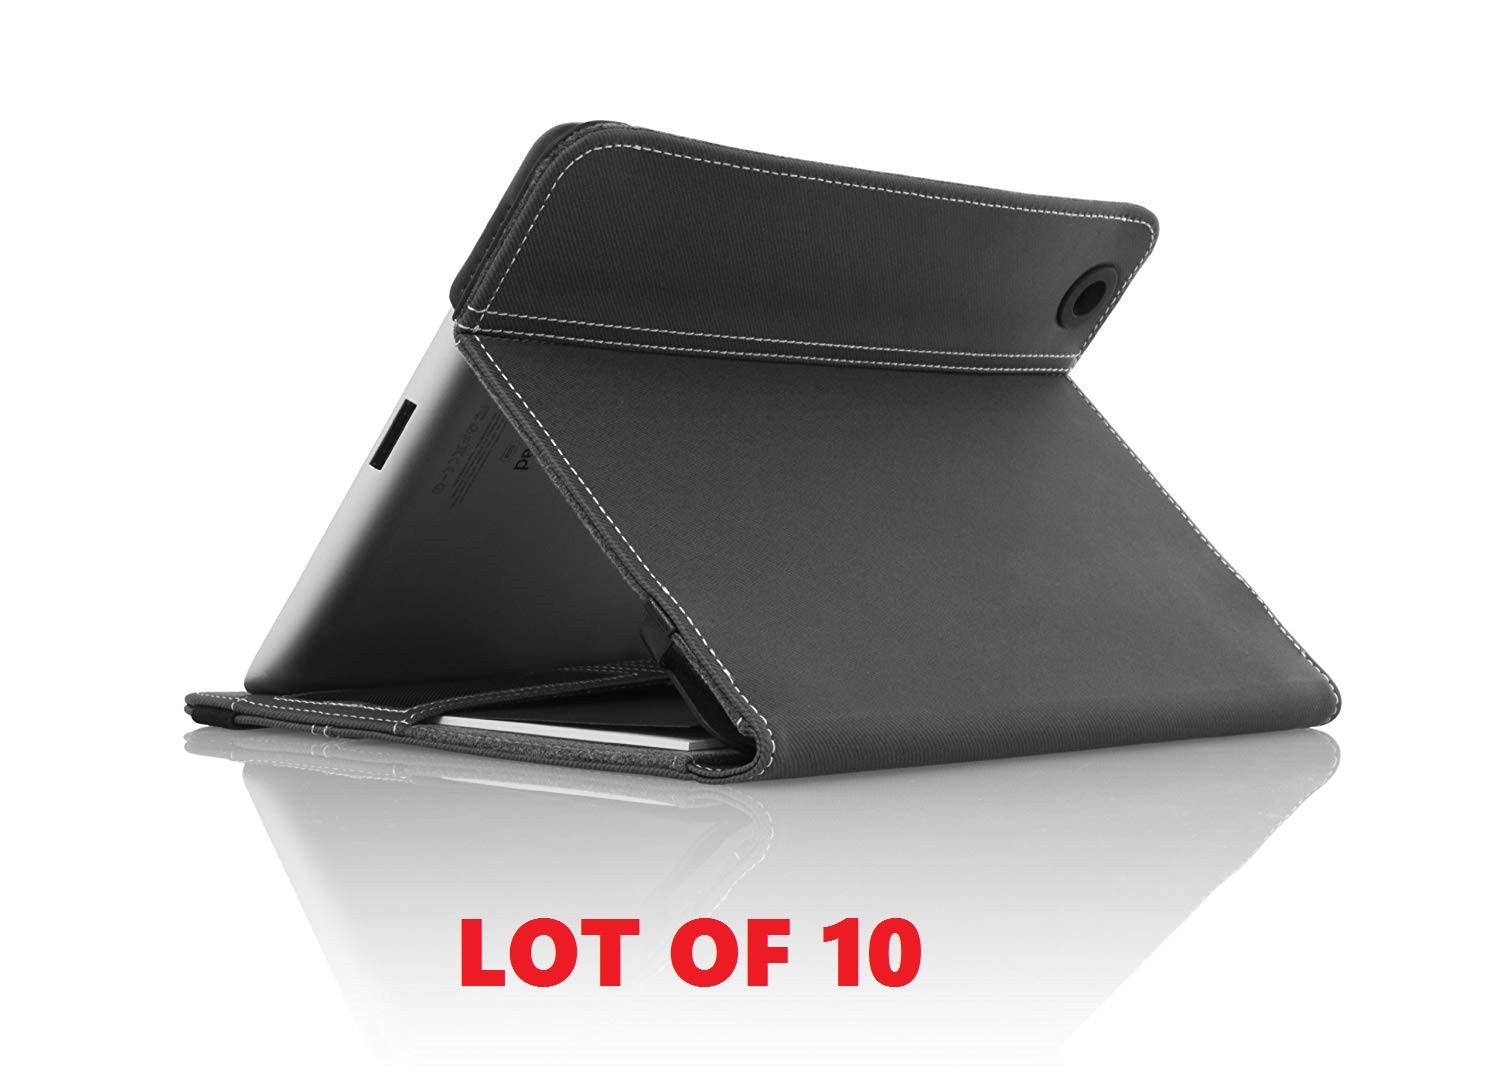 Lot of 10 Targus Business Folio Cases For iPad 3rd 4th Gen THZ15502US Brand New